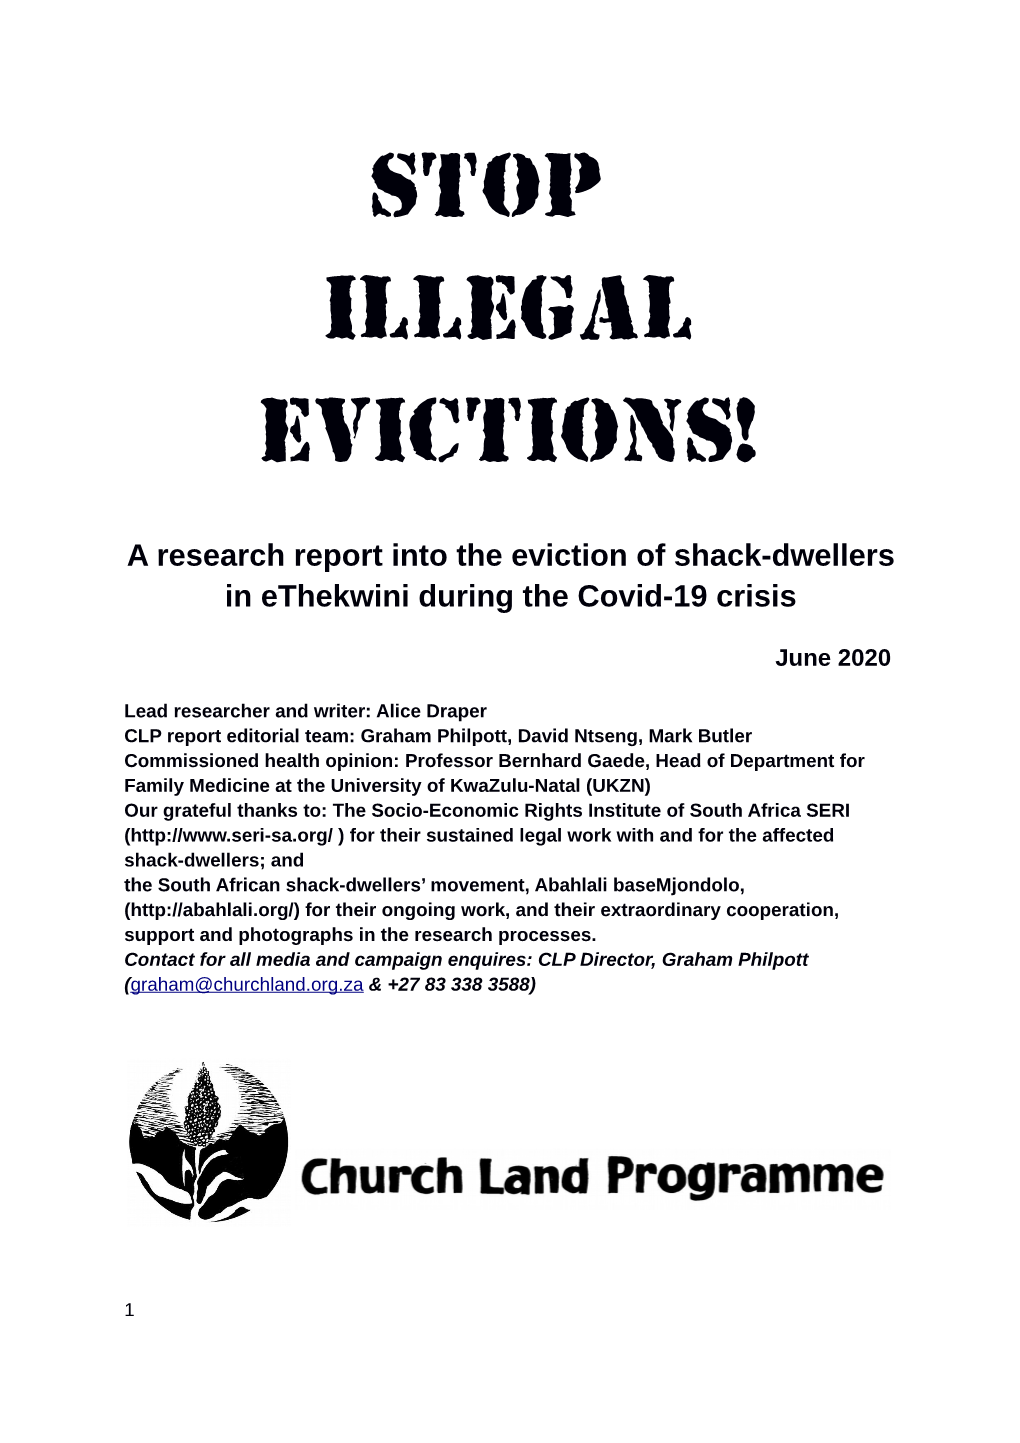 STOP Illegal Evictions!